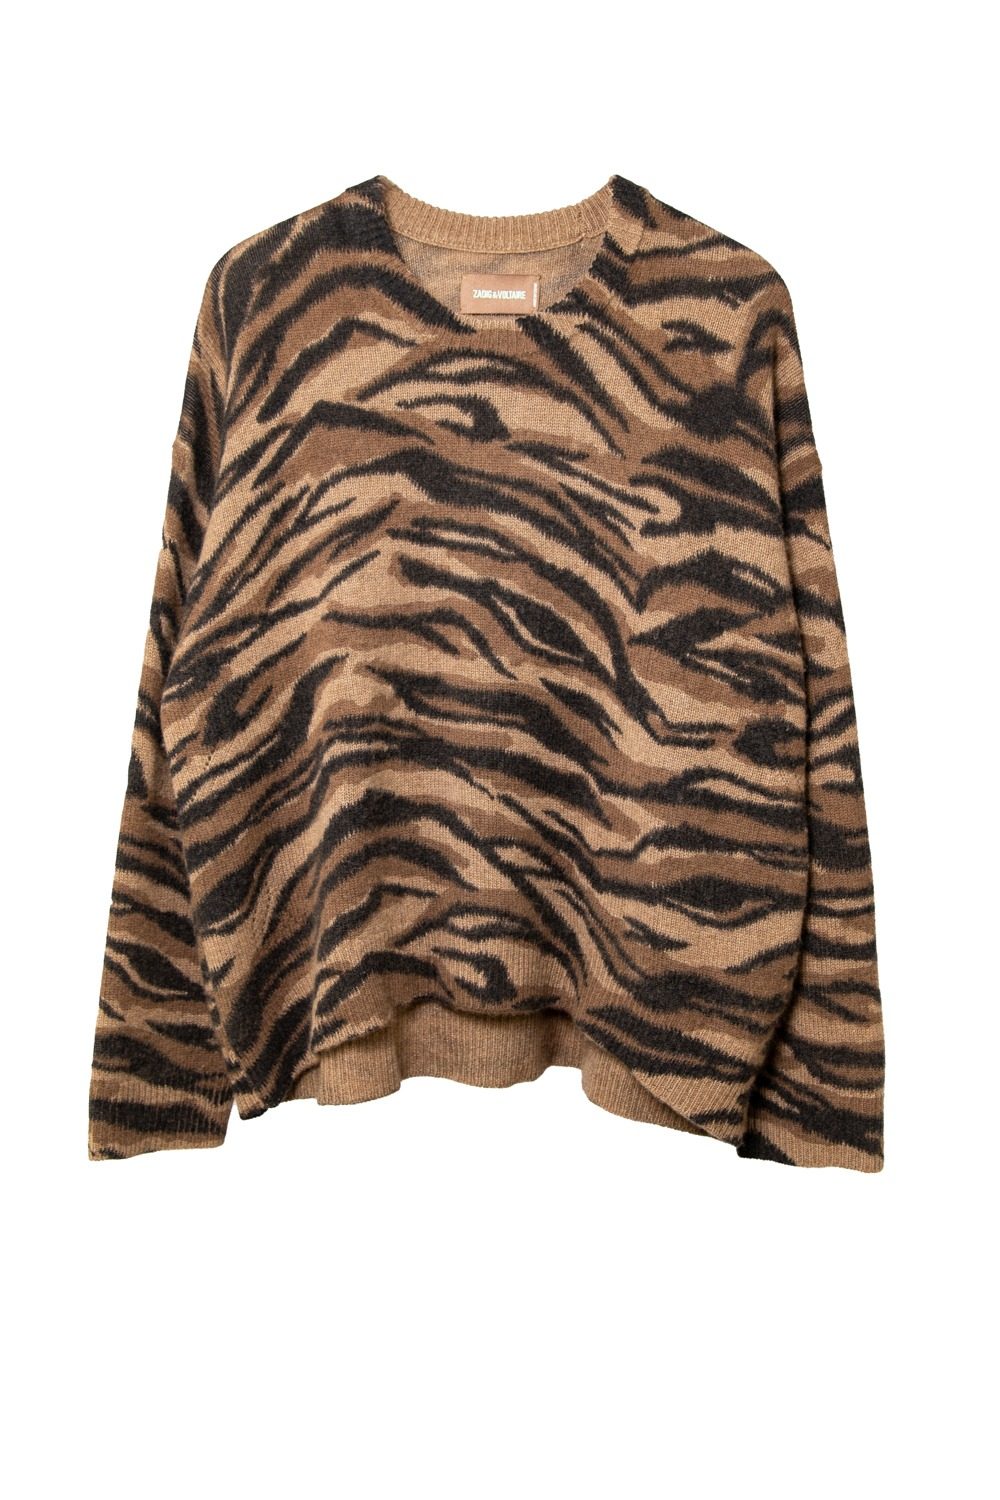 Thumbnail of http://Zadig%20&%20Voltaire%20Markus%20WS%20Tiger%20Print%20Strickpullover